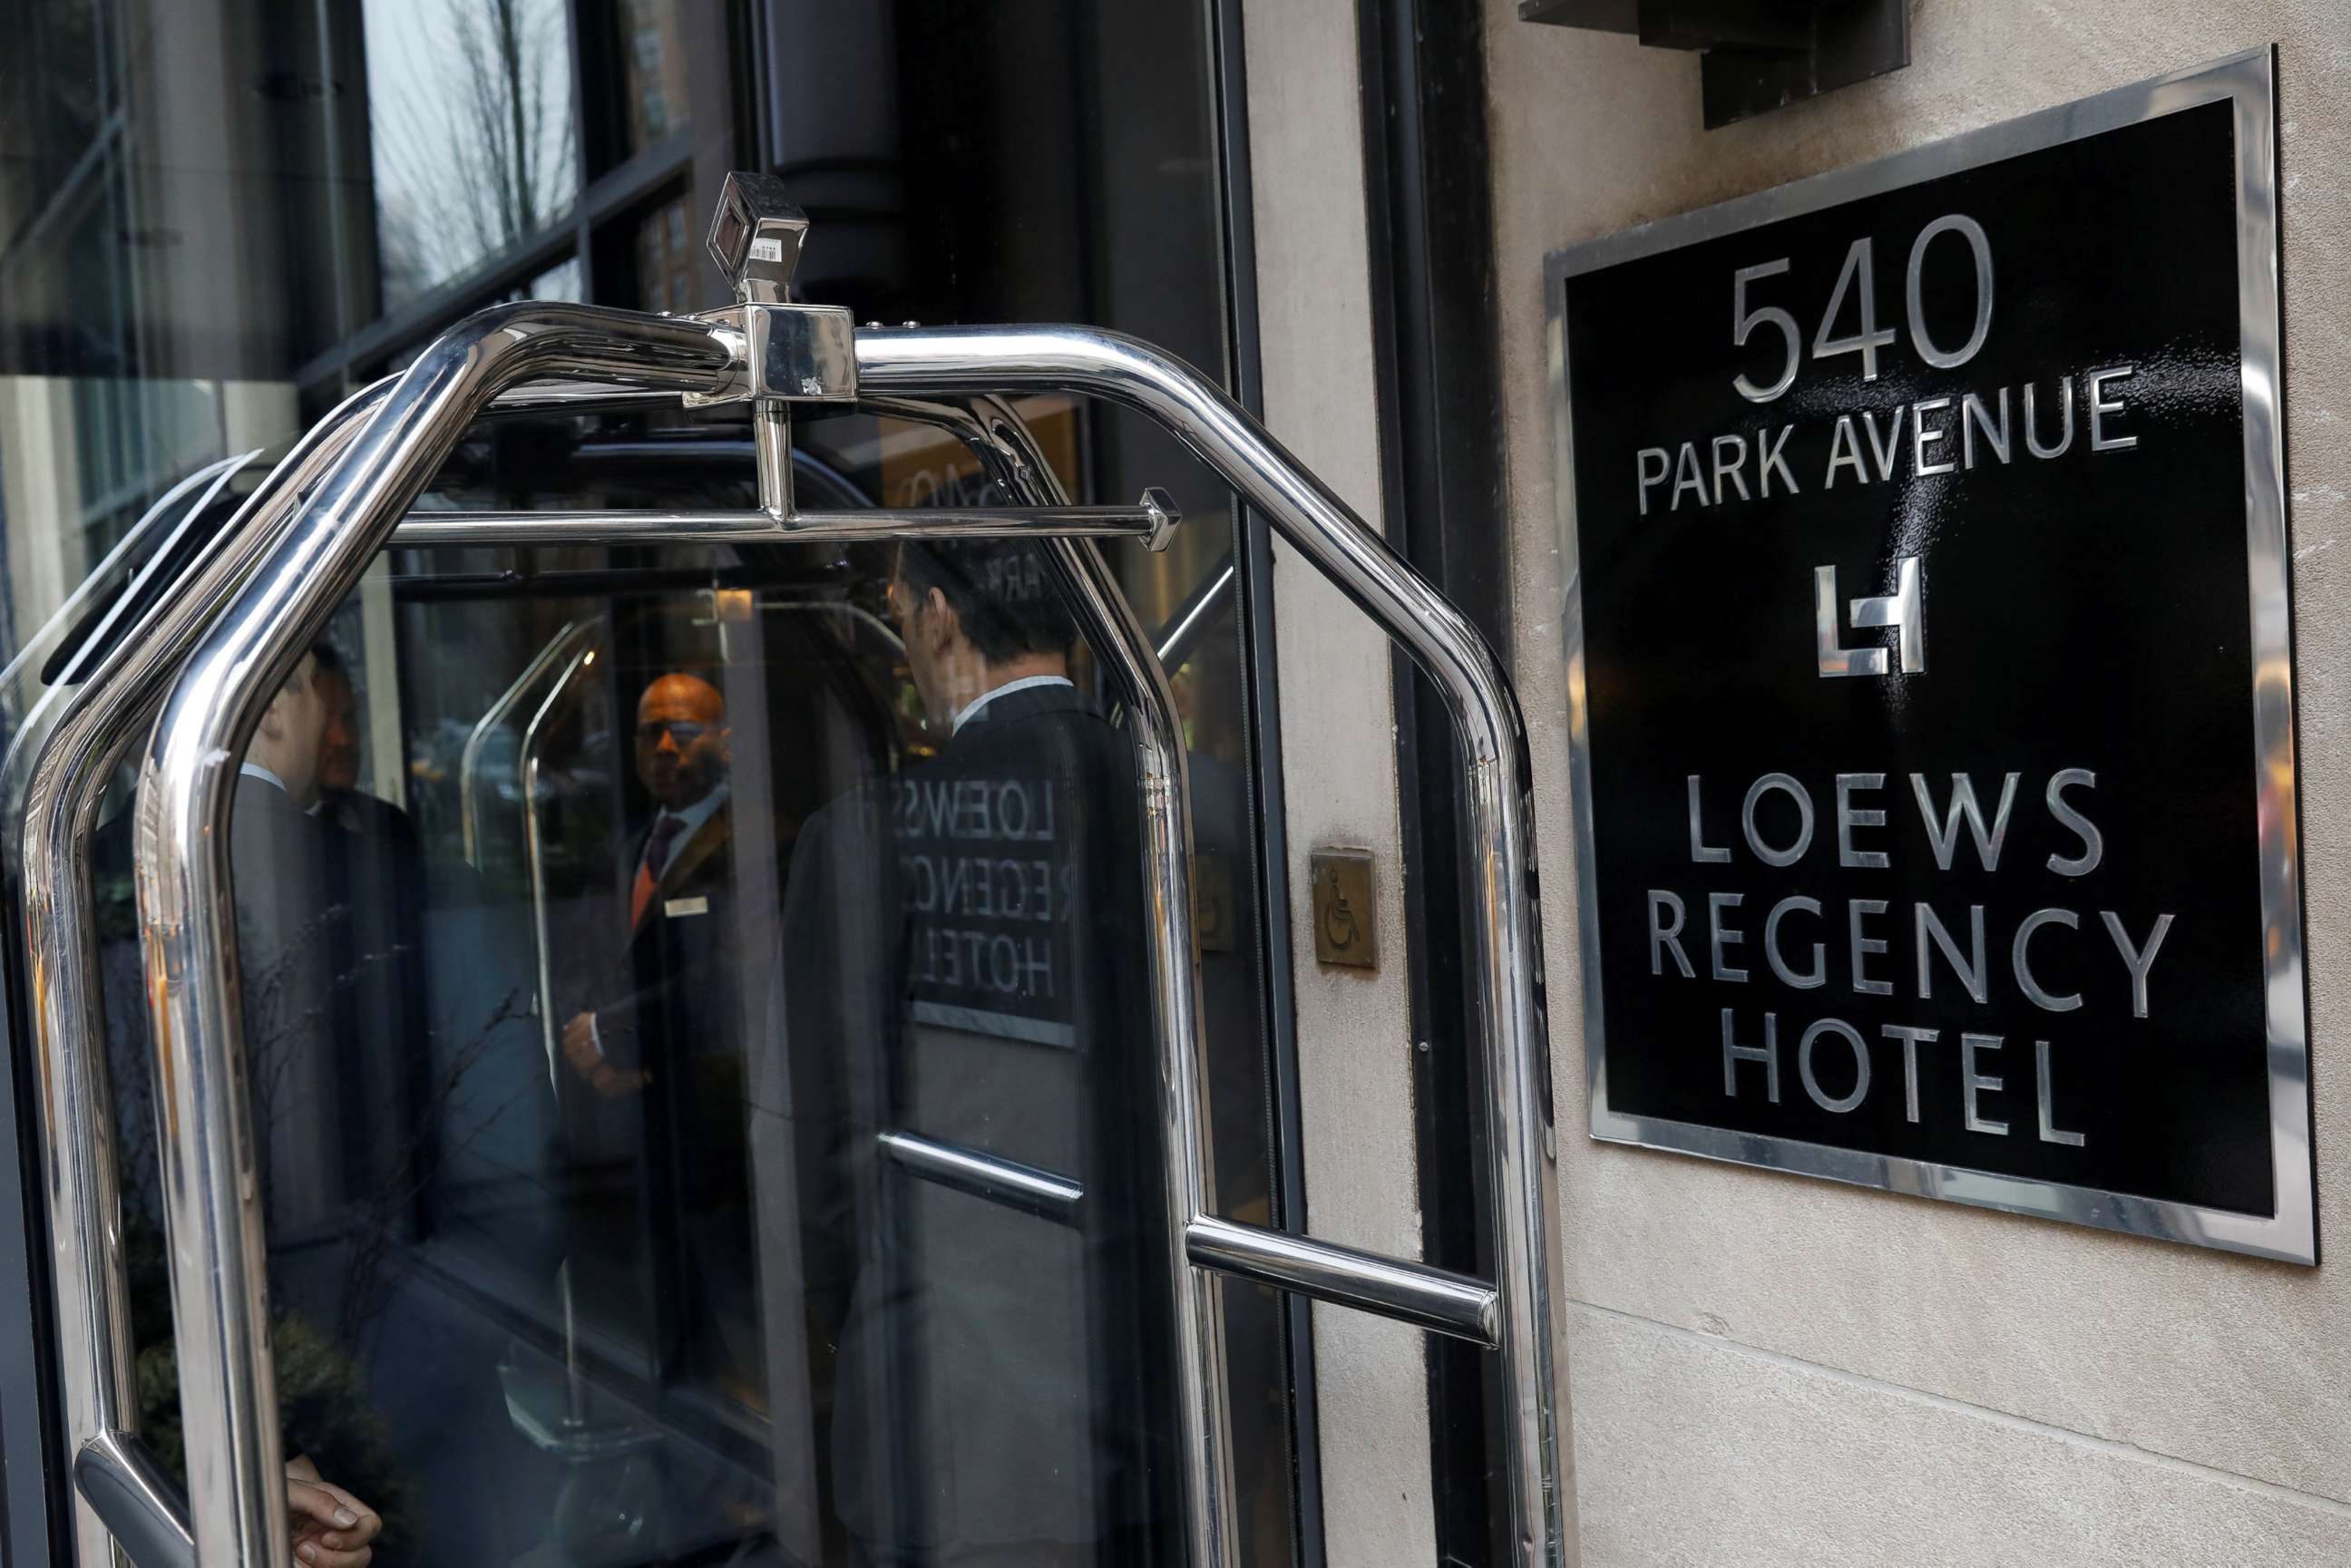 PHOTO: The outside of the Loews Regency Hotel where officials raided a room belonging to President Trump's personal lawyer Michael Cohen is seen in New York, April 9, 2018.